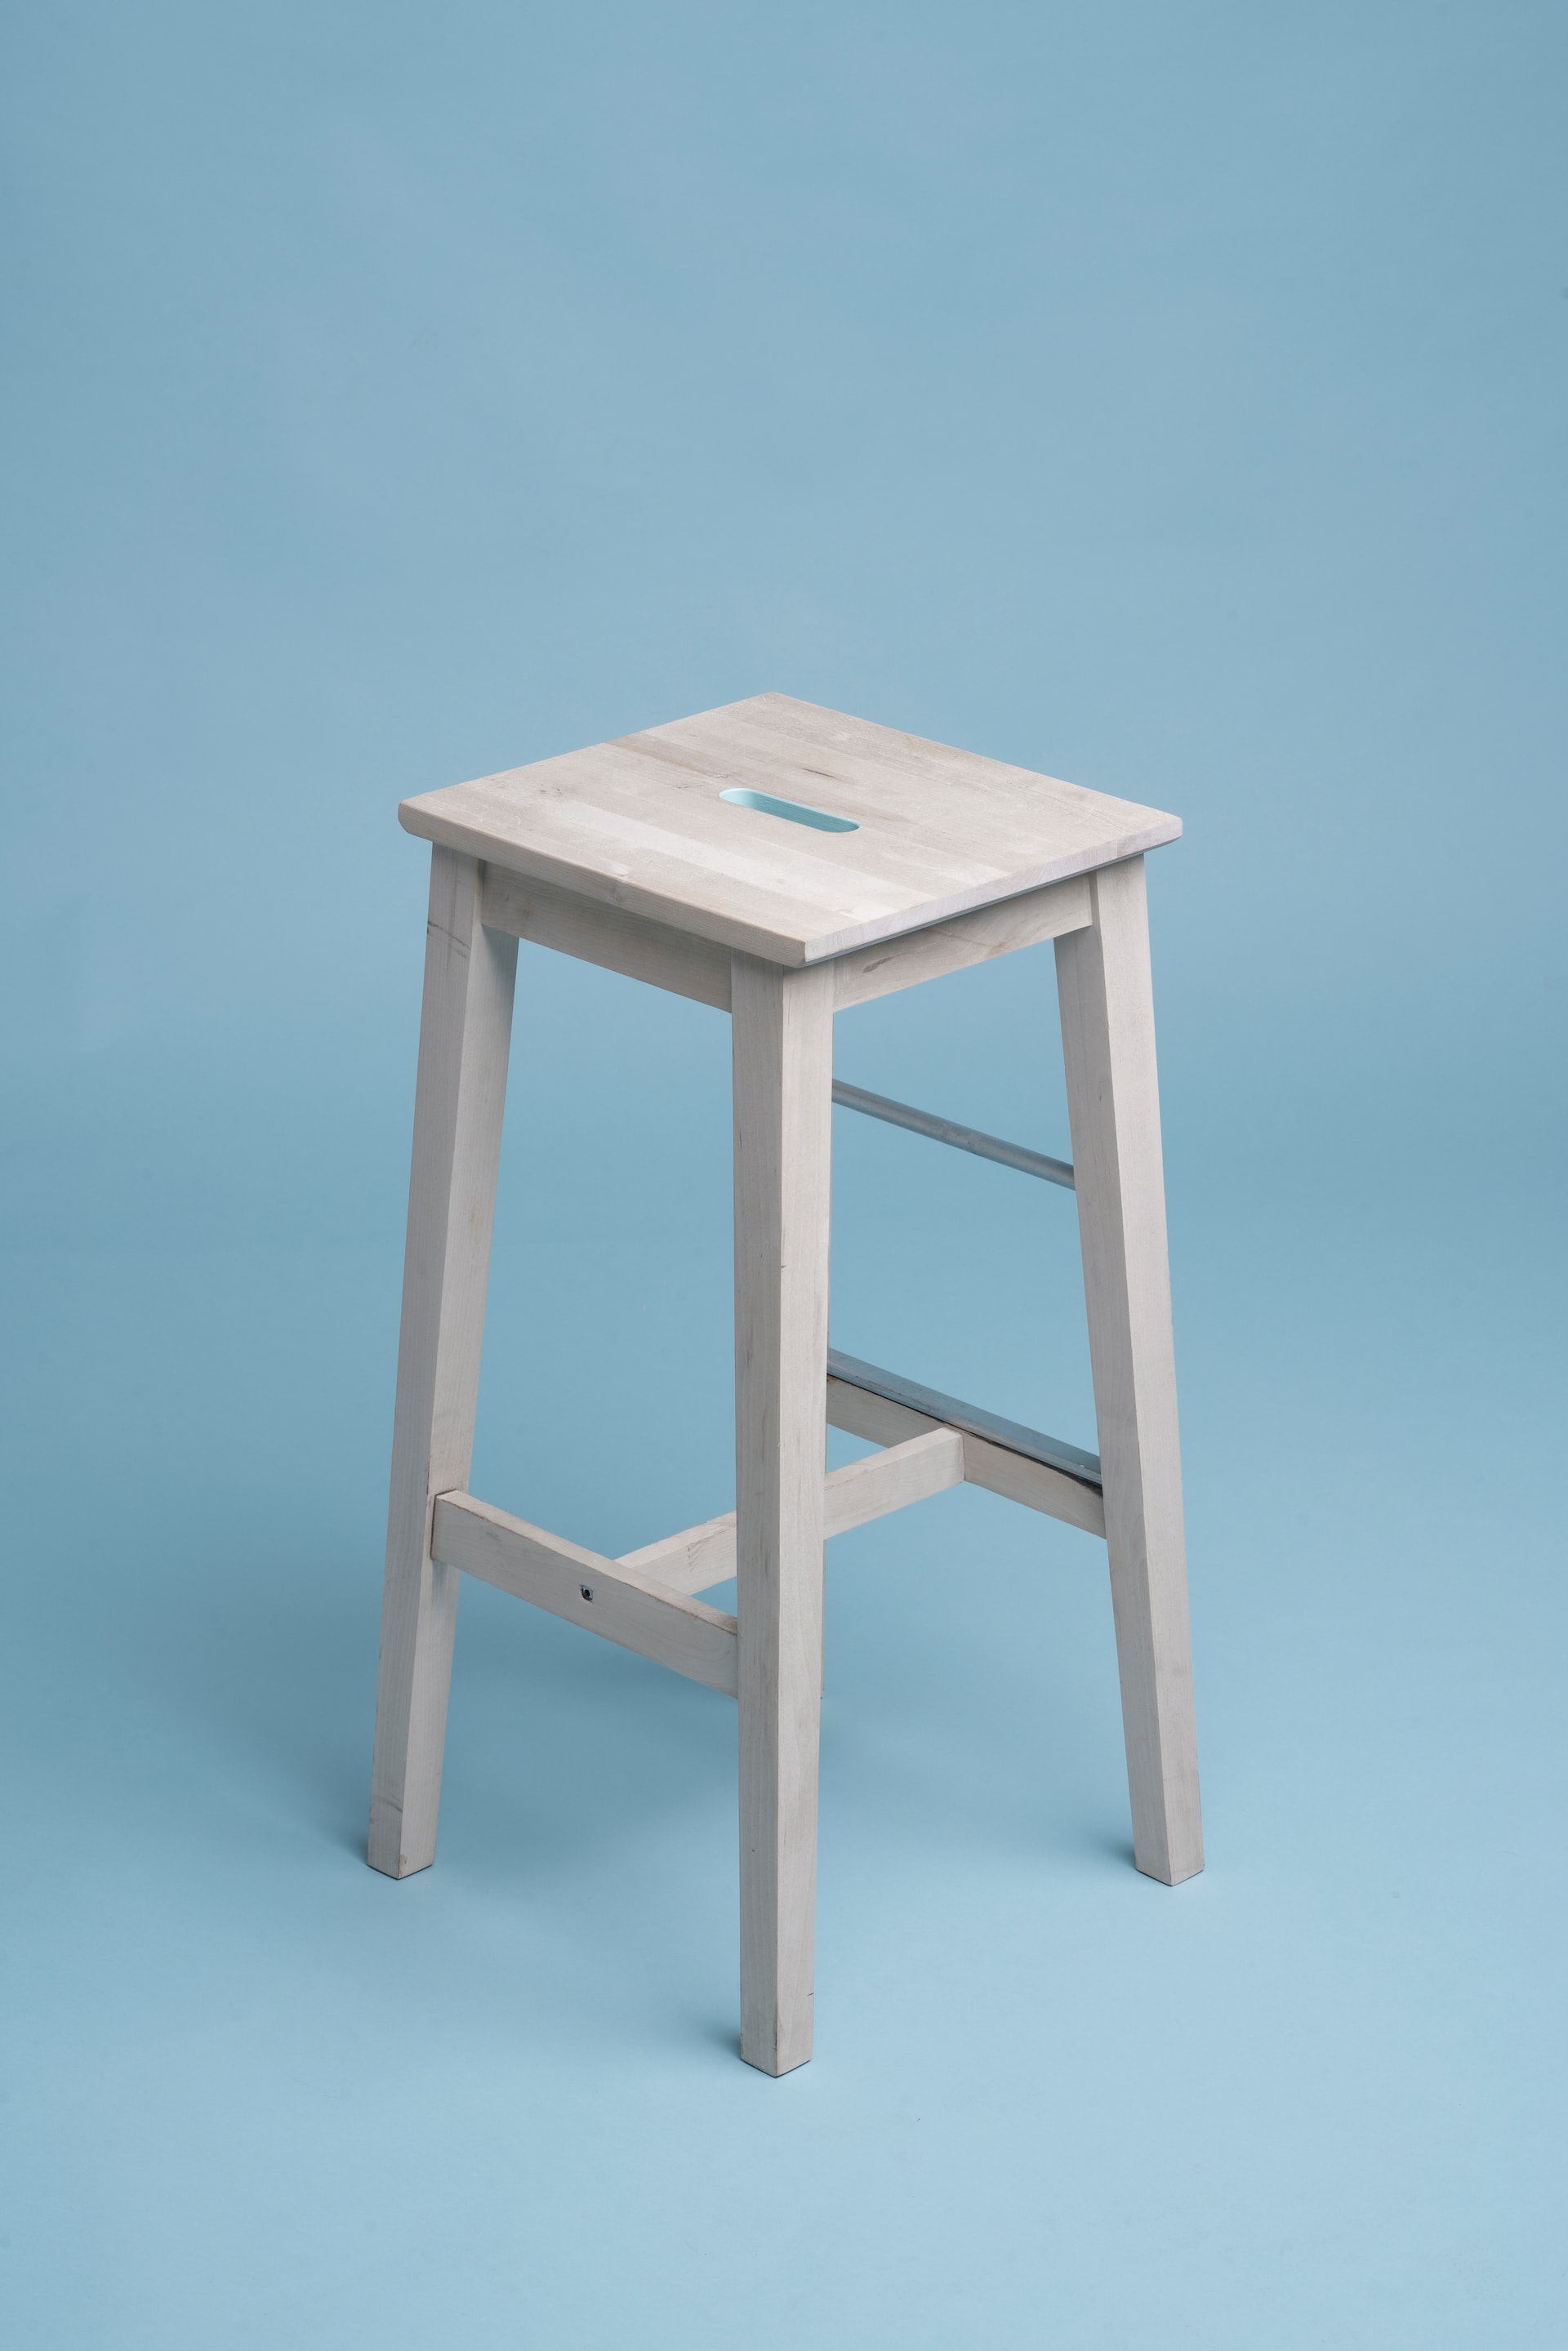 A gray, wooden stool with blue studio wallpaper beneath and behind it